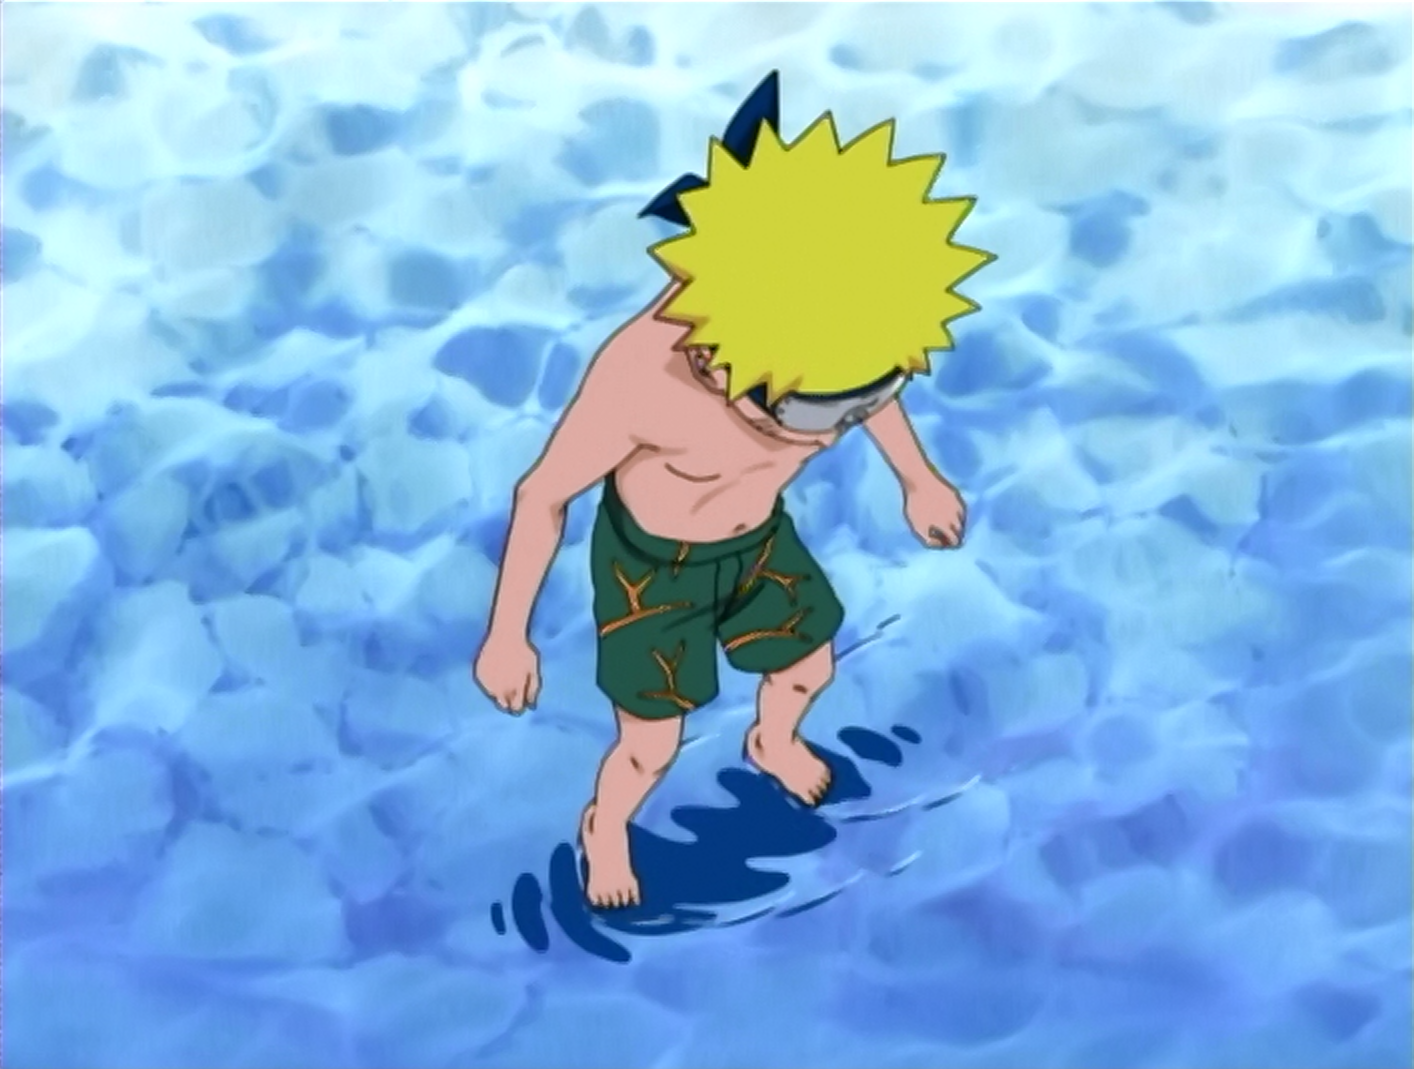 http://img4.wikia.nocookie.net/__cb20130323153756/naruto/es/images/d/d0/Episodio_53.png